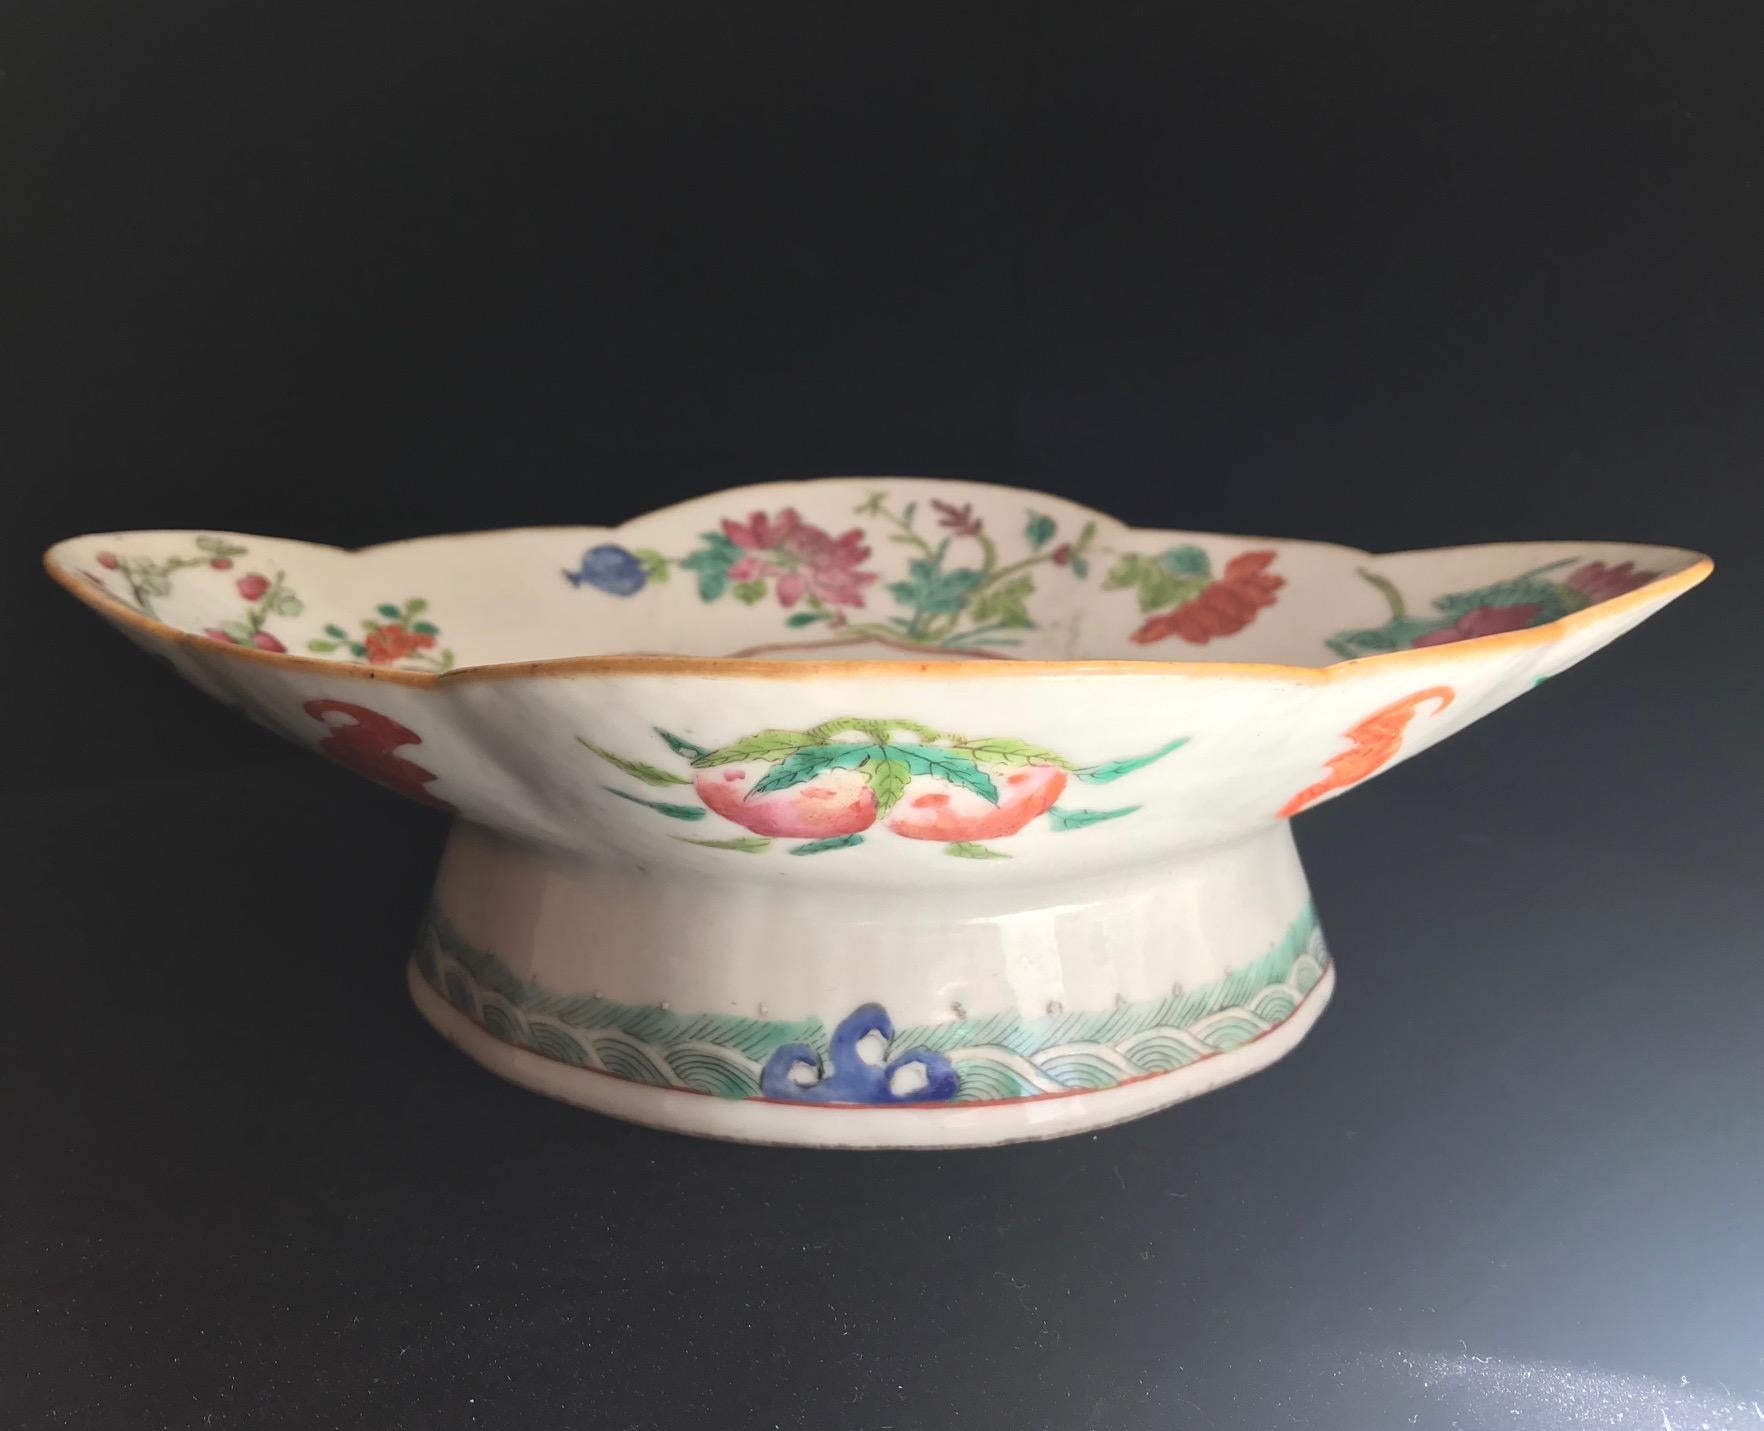 The footed bowl is hand painted in enamel, showing an Immortal resting on a large root. The figure is accompanied by an inscription identifying the character. The exterior is decorated with various fruits and flying bats, an auspicious symbol of